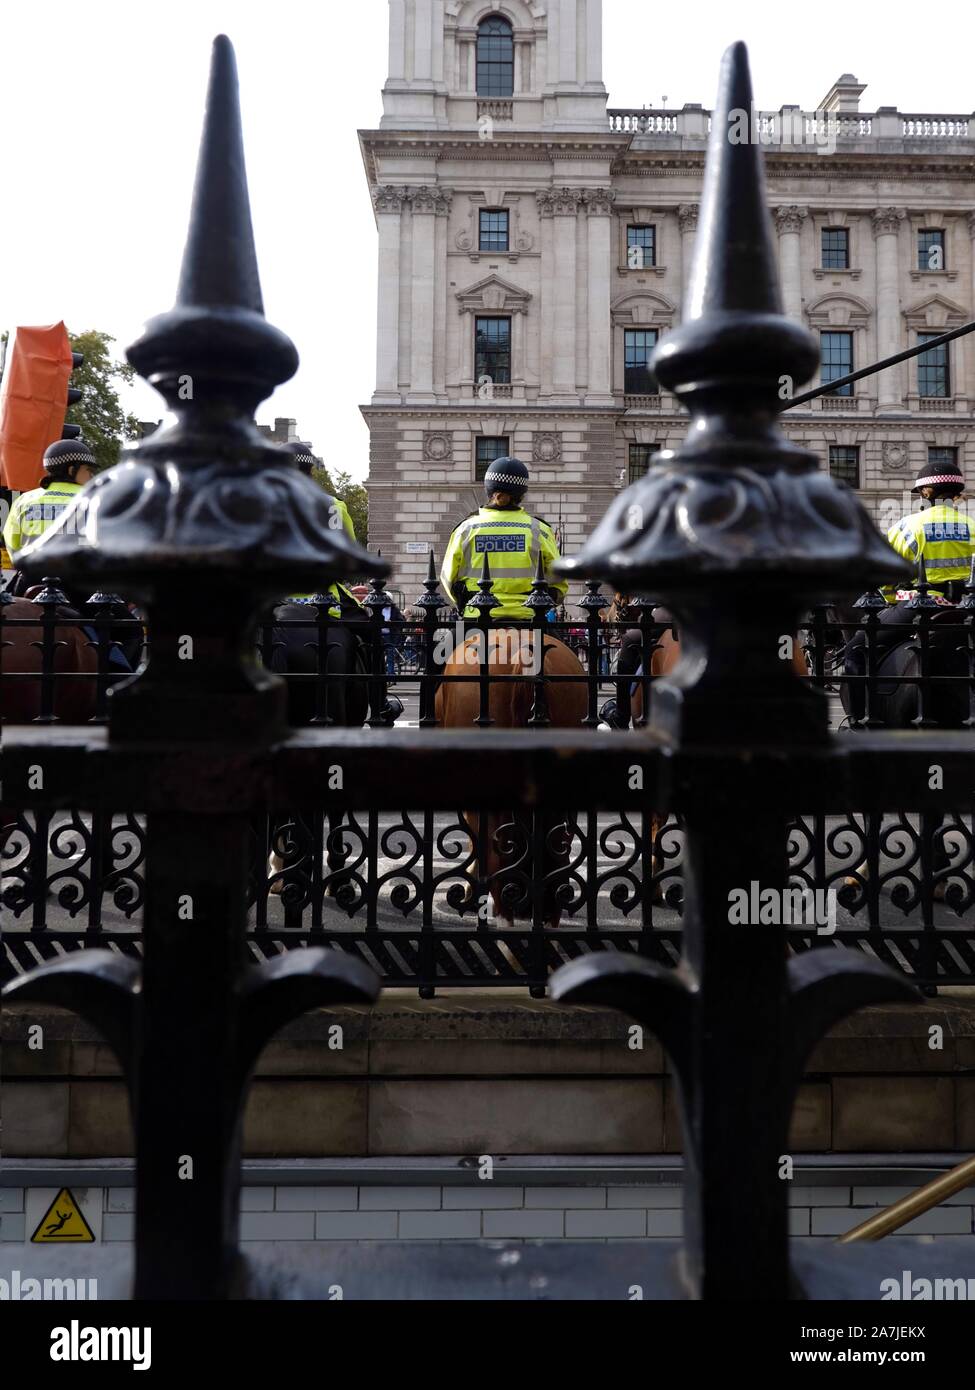 Mounted Metropolitian police officers behind iron railings at Westminster Station. Stock Photo